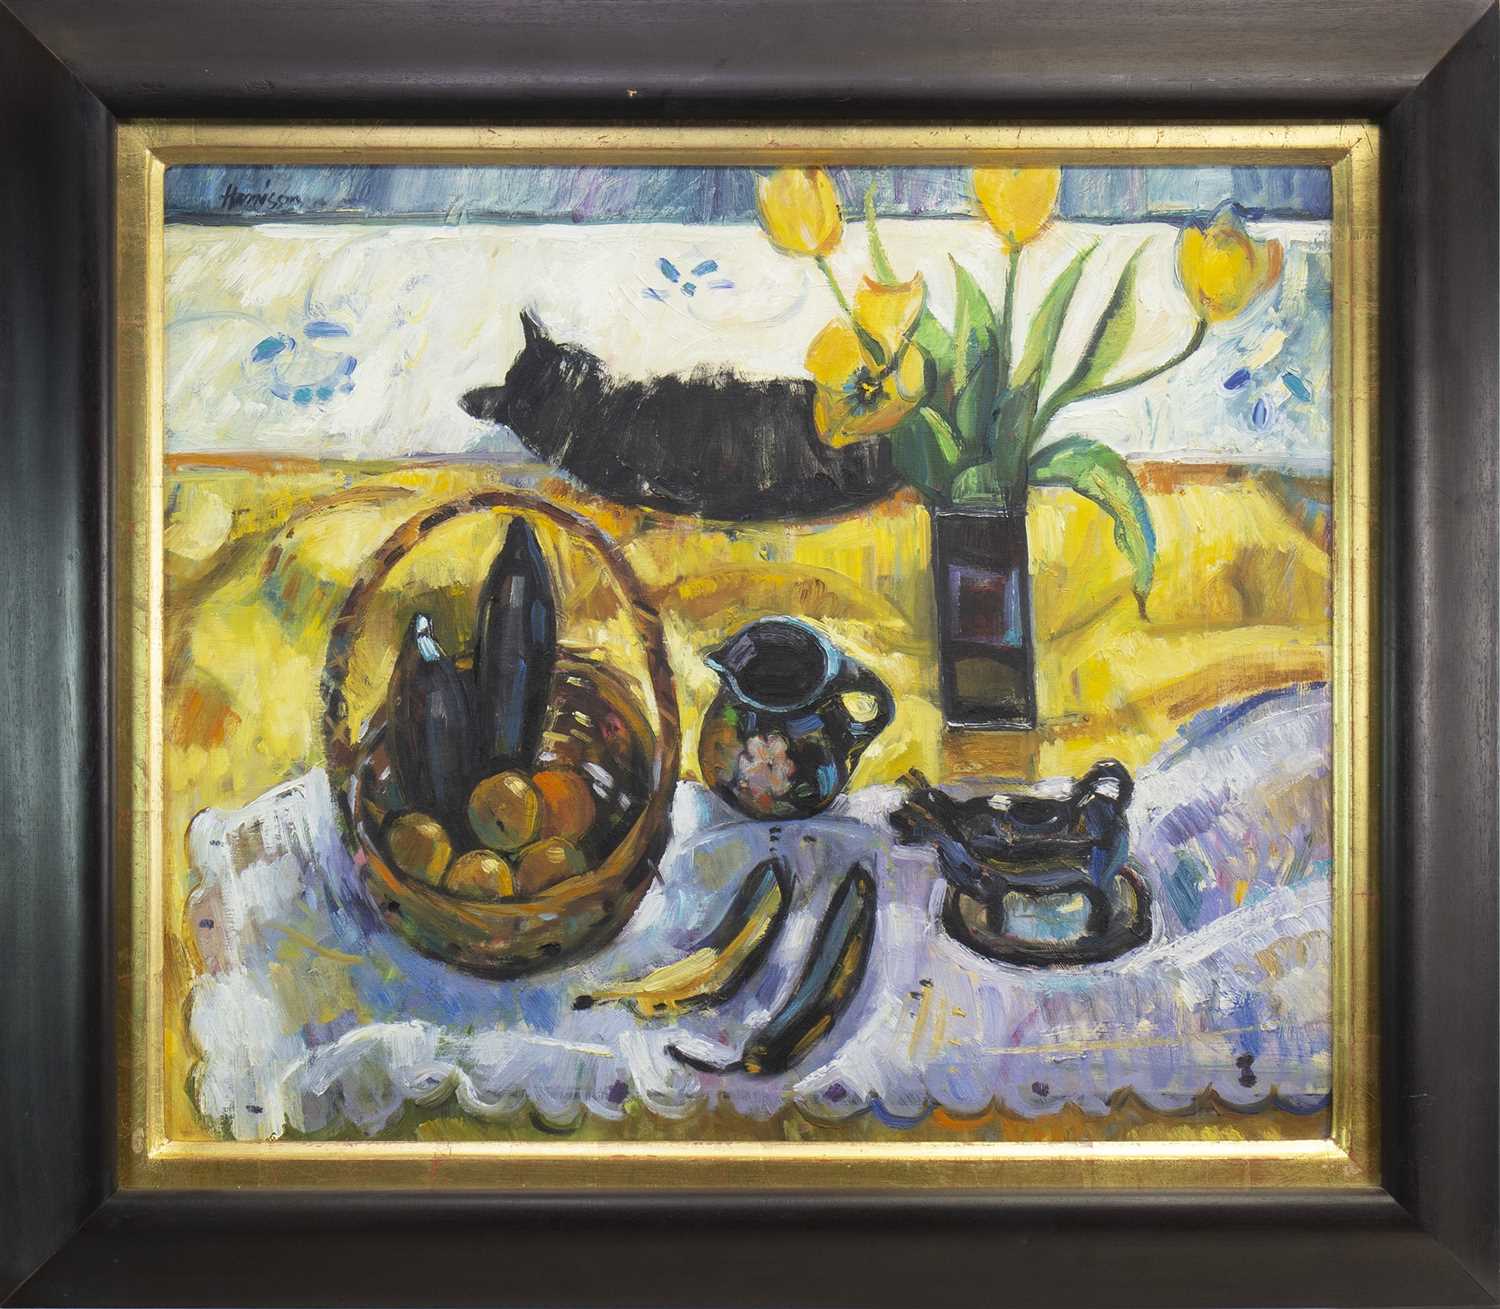 Lot 790 - ARRANGEMENT IN BLACK AND YELLOW, AN OIL BY LAURA HARRISON